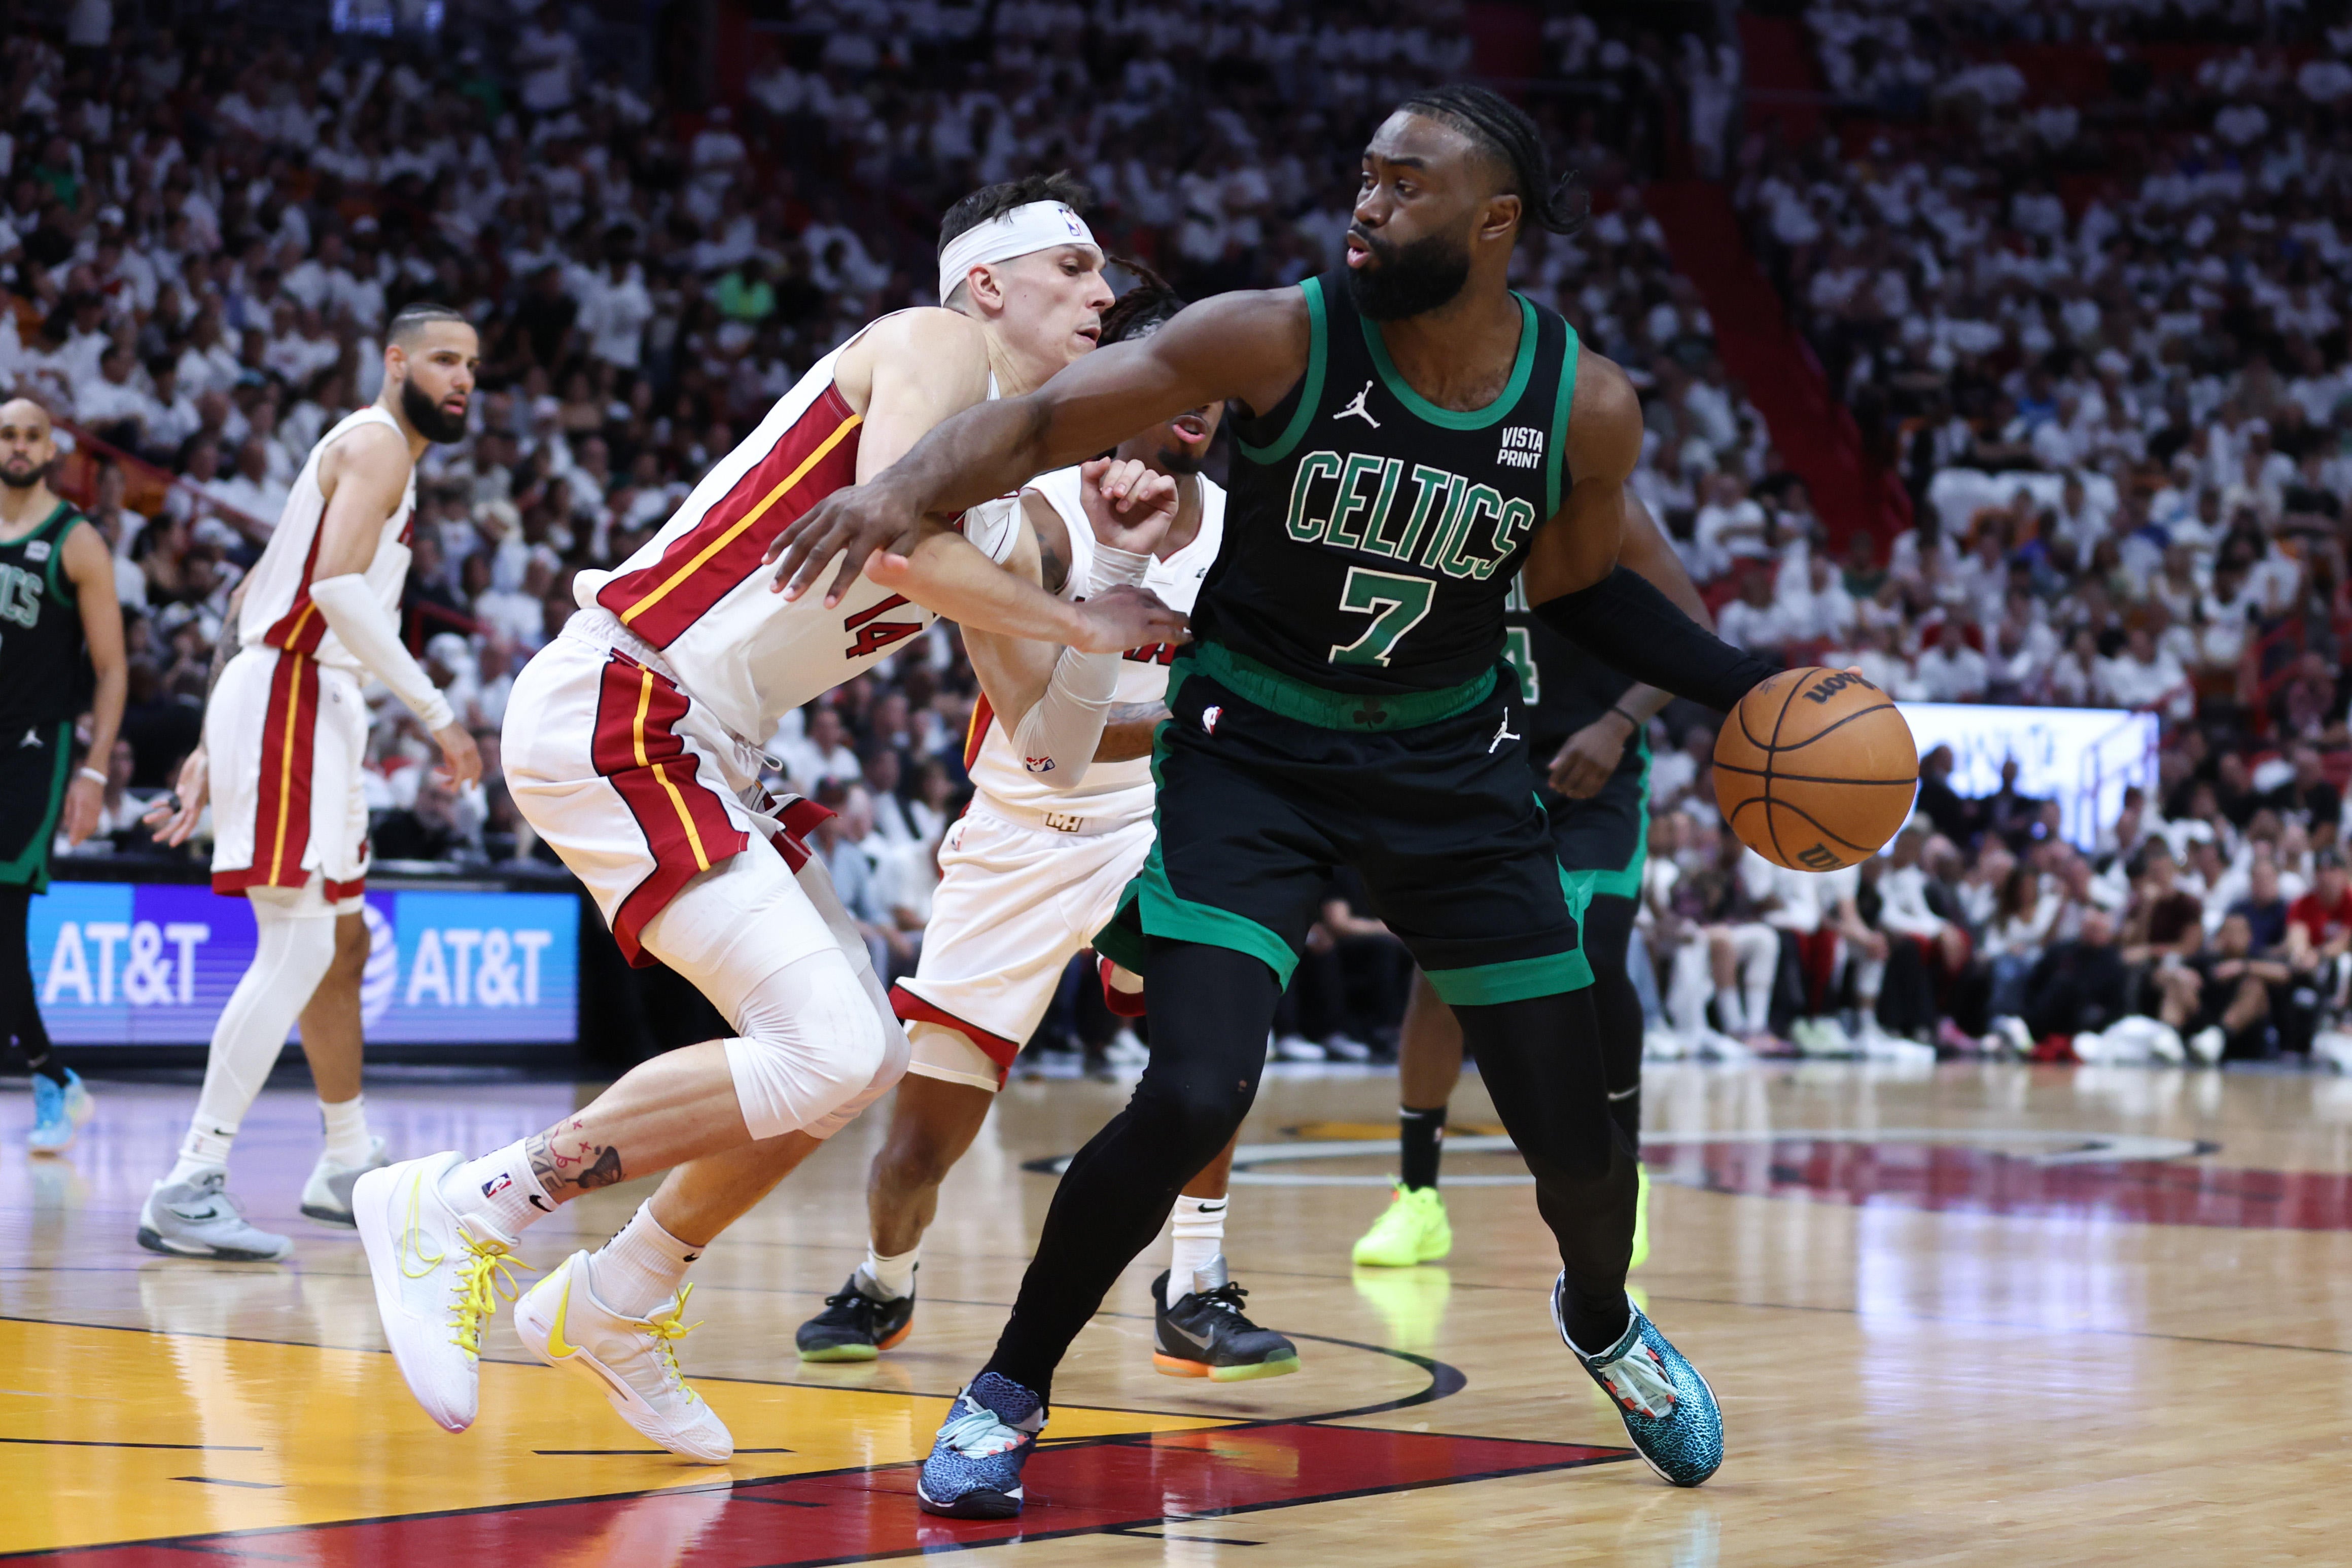 Celtics vs. Heat schedule: Where to watch Game 5, start time, prediction, odds, TV channel, live stream online